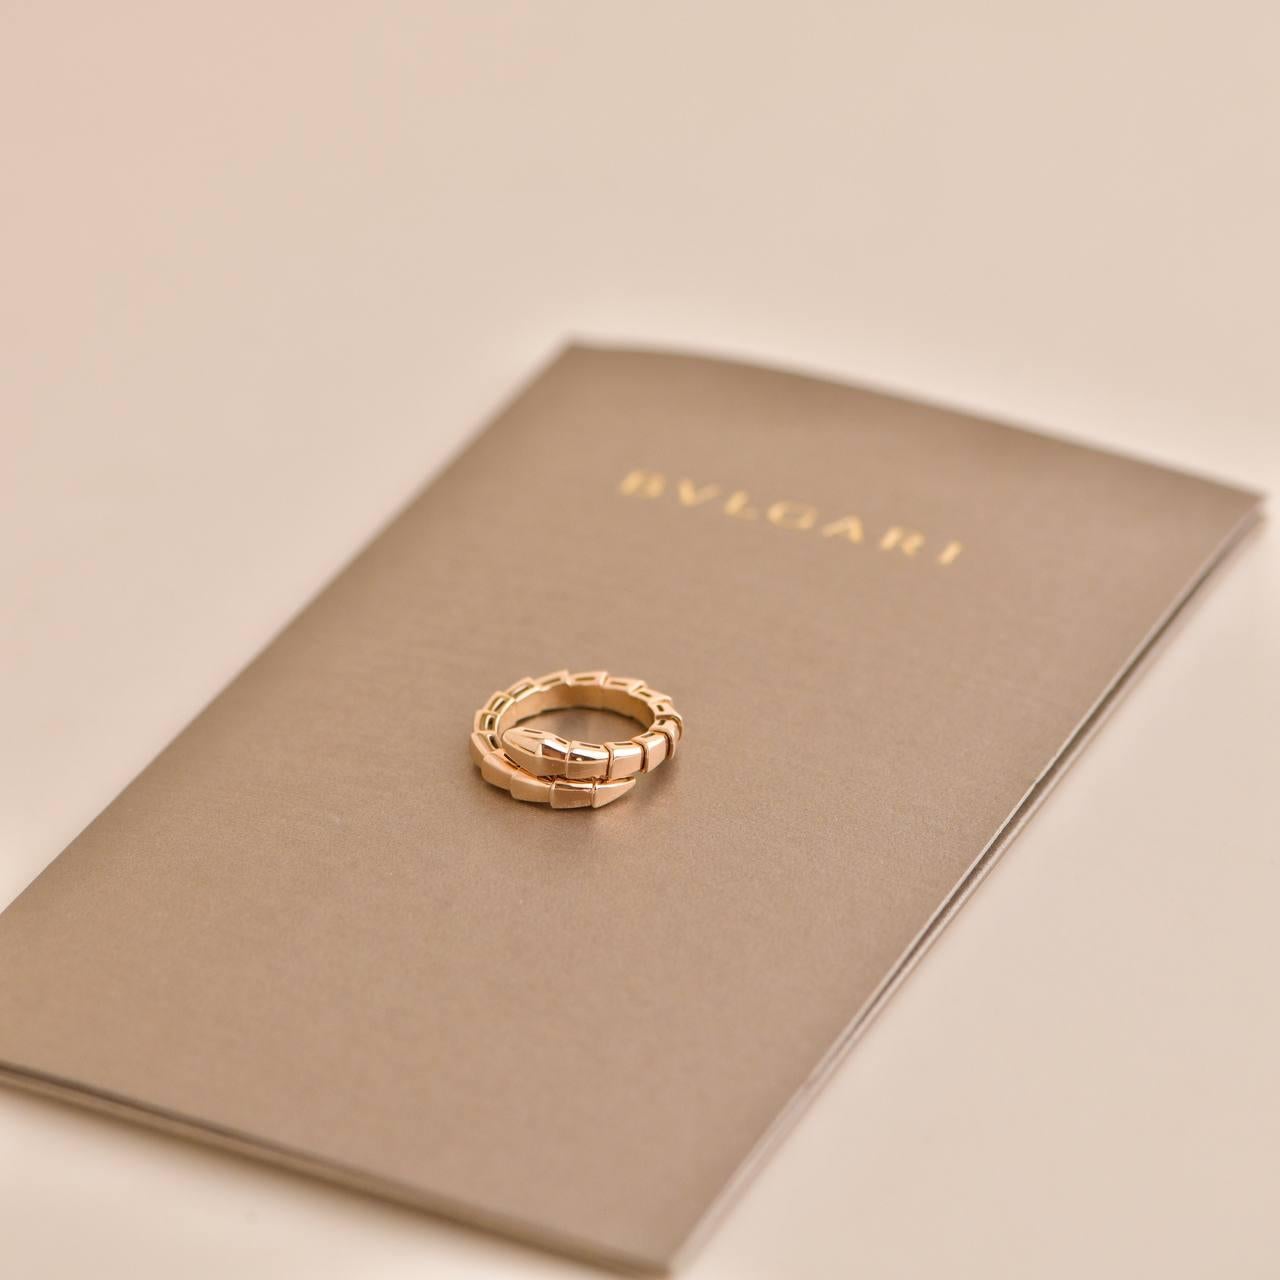 Bvlgari Rose Gold Serpenti Viper Ring Size M  In Excellent Condition For Sale In Banbury, GB